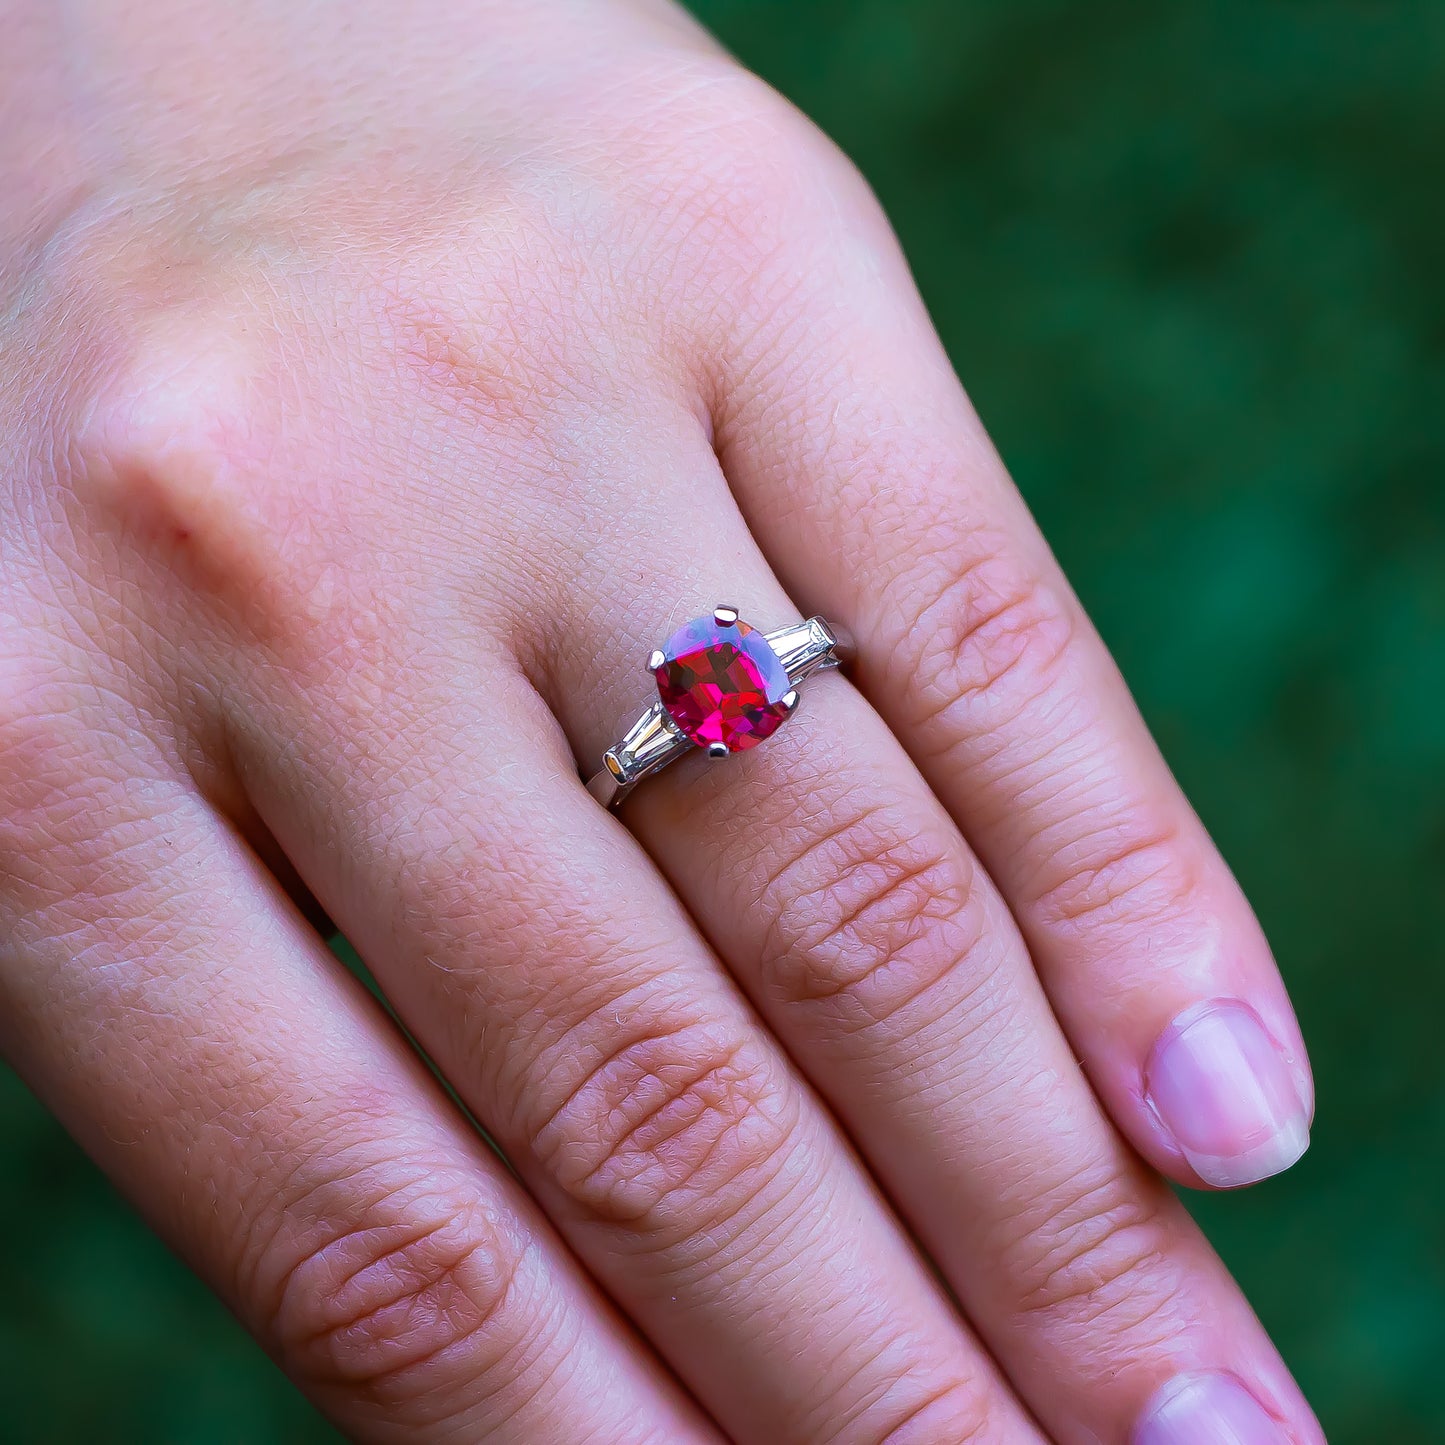 Hot Pink 2.80 Carat Spinel Ring With Diamonds 0.28 Carats